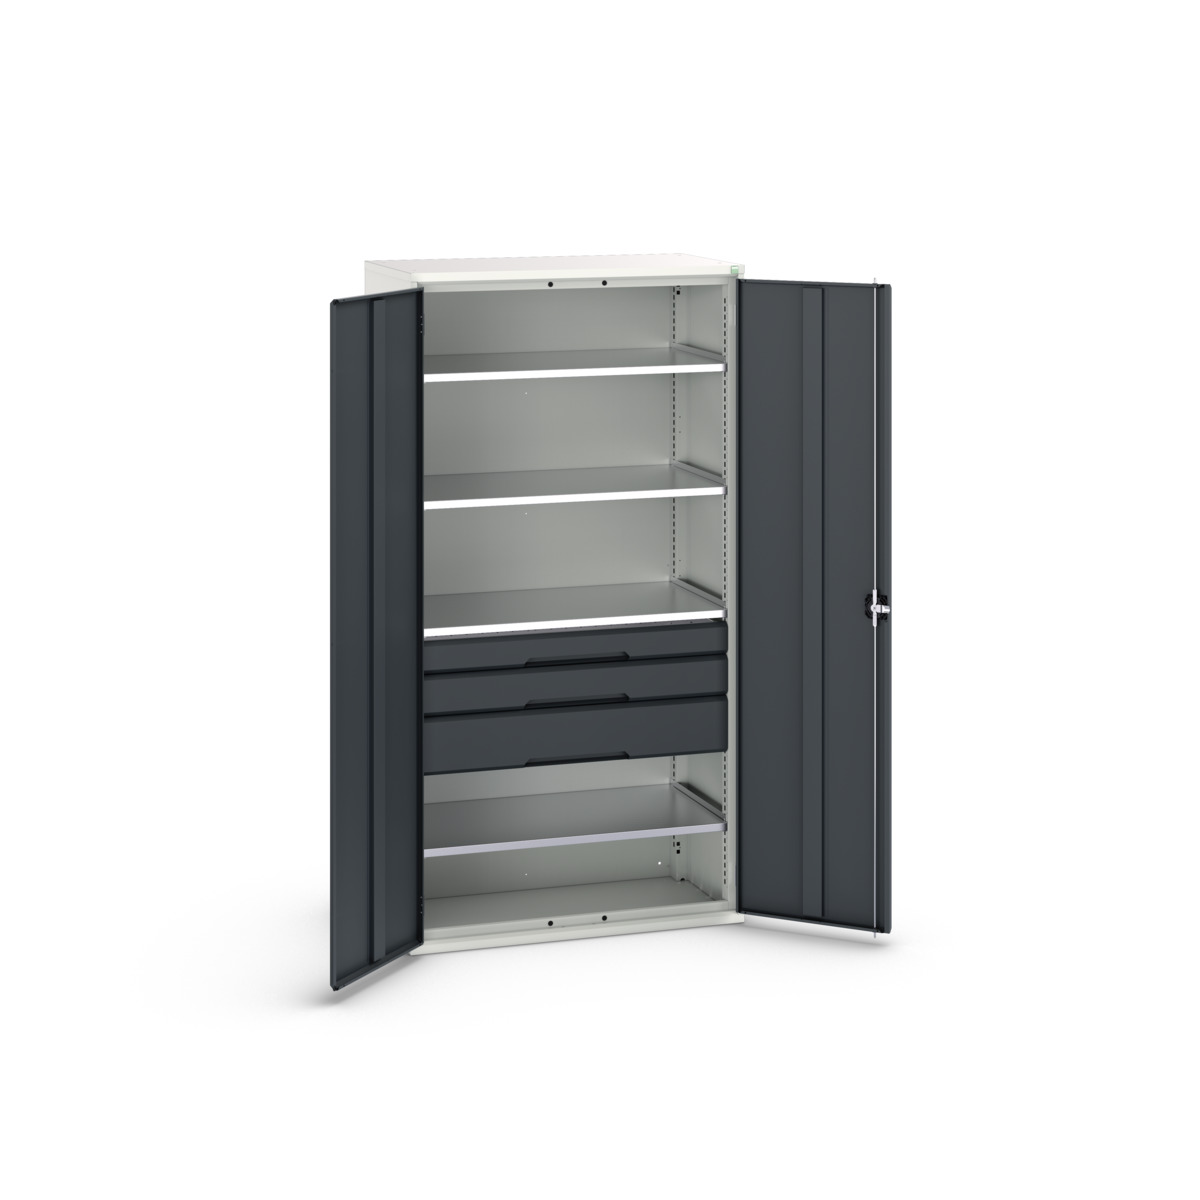 16926575. - verso kitted cupboard